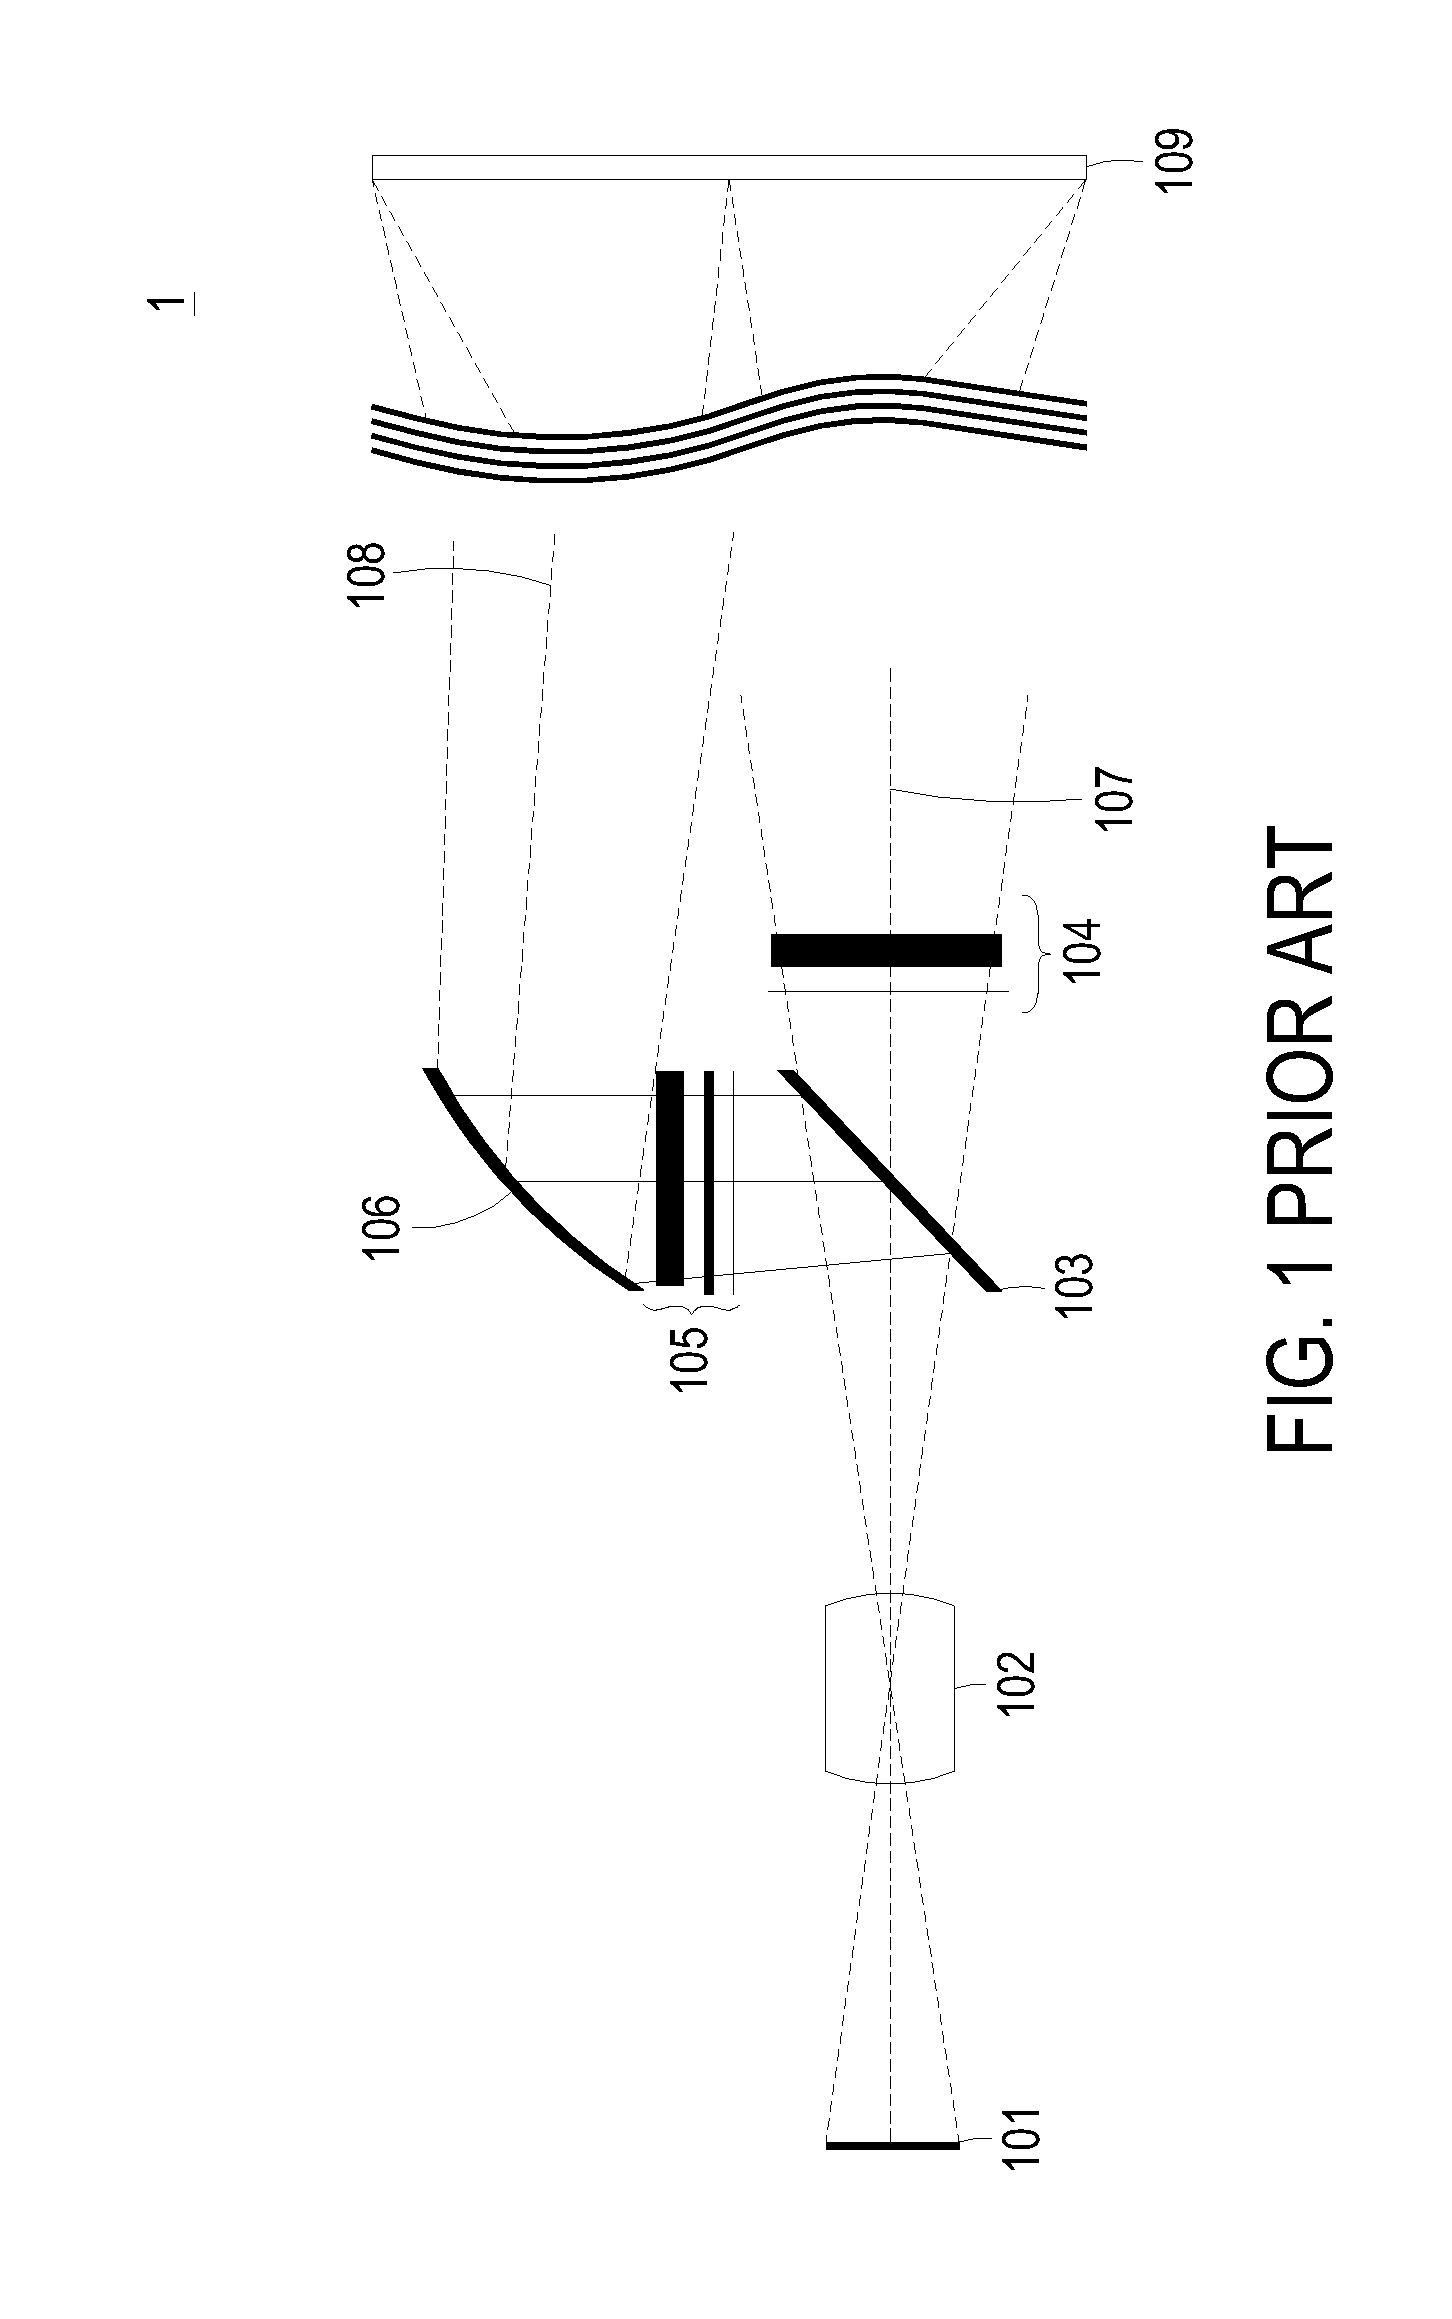 Polarization conversion system and stereoscopic projection system employing same